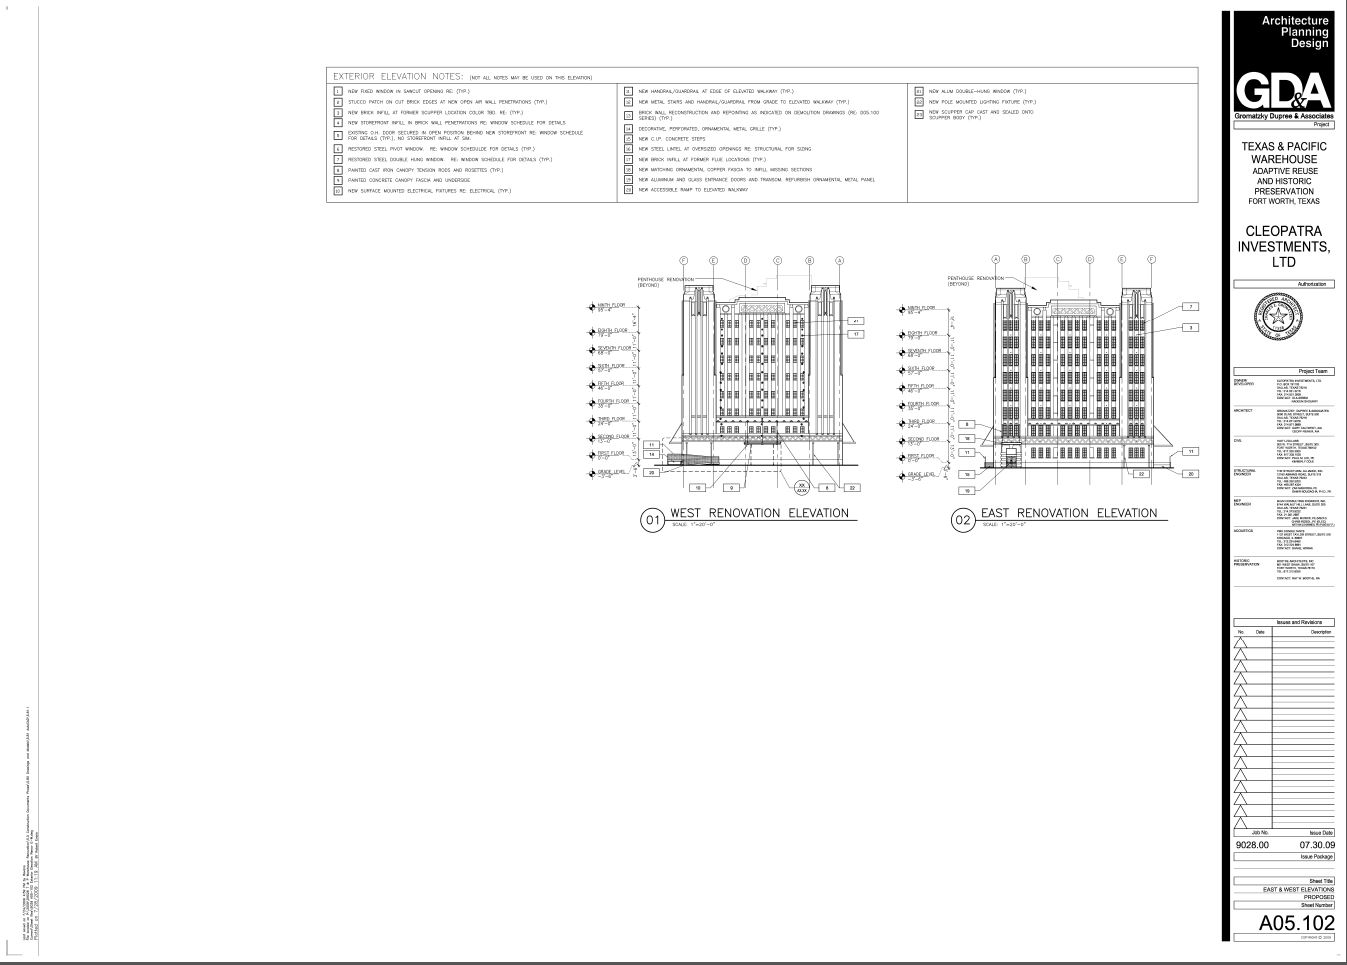 Approved Plans for New Construction with New Enlarged Windows on West Elevation - East & West Elevations